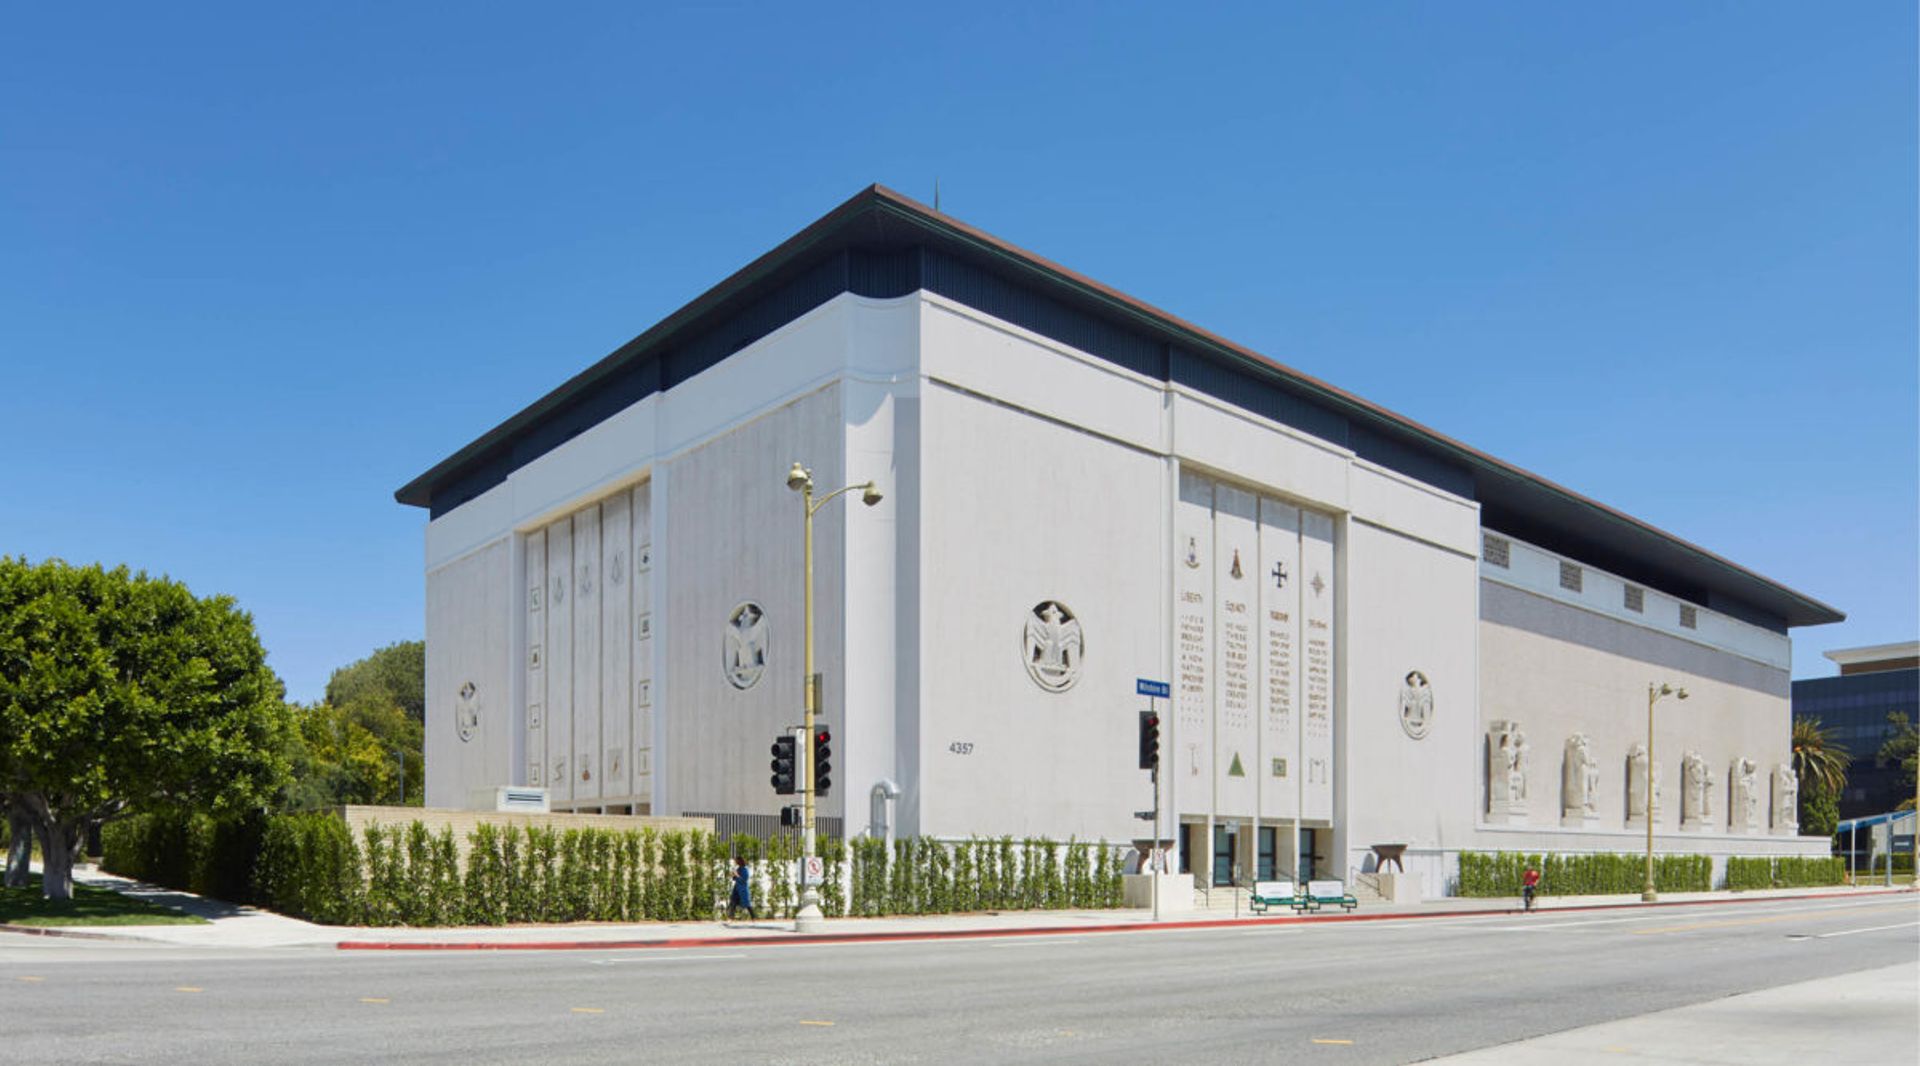 The Marciano Art Foundation opened in 2017, in a 90,000 sq. ft former Masonic Temple on Wilshire Boulevard in Los Angeles Courtesy of the Marciano Art Foundation